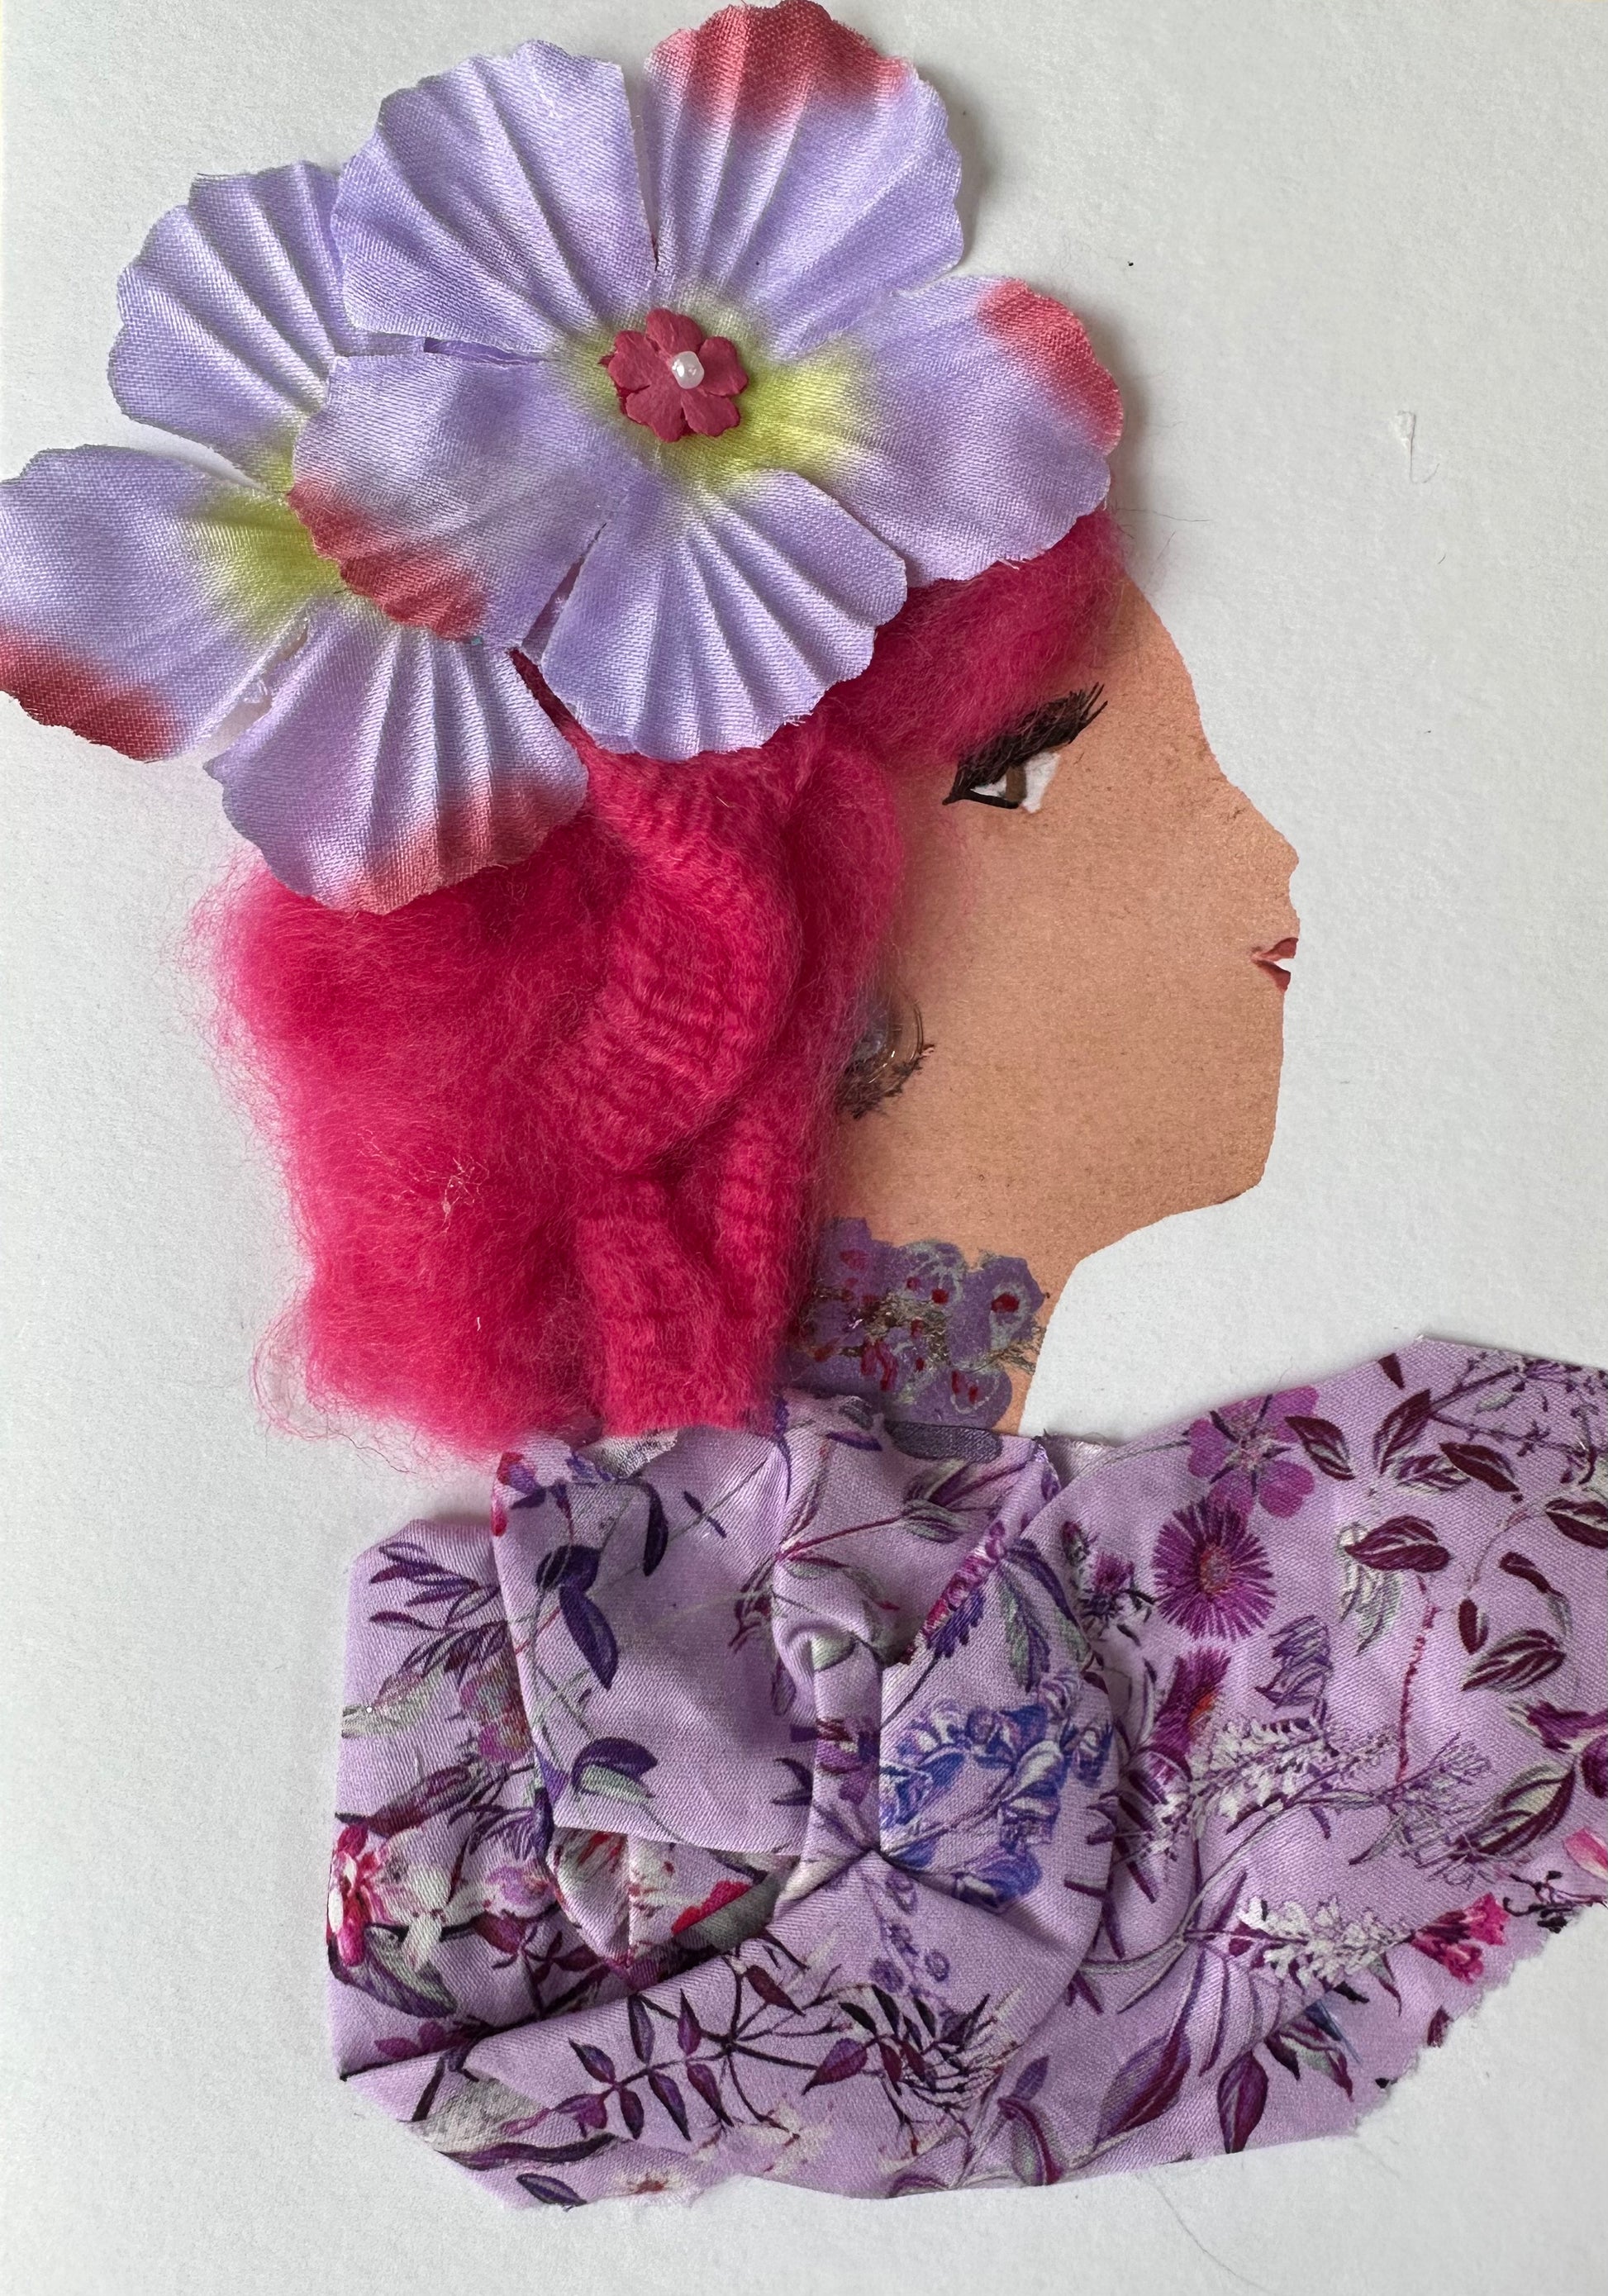 This handmade card is of a woman dressed in a purple, floral patterned blouse. Her electric pink hair has two light purple flowers attached.